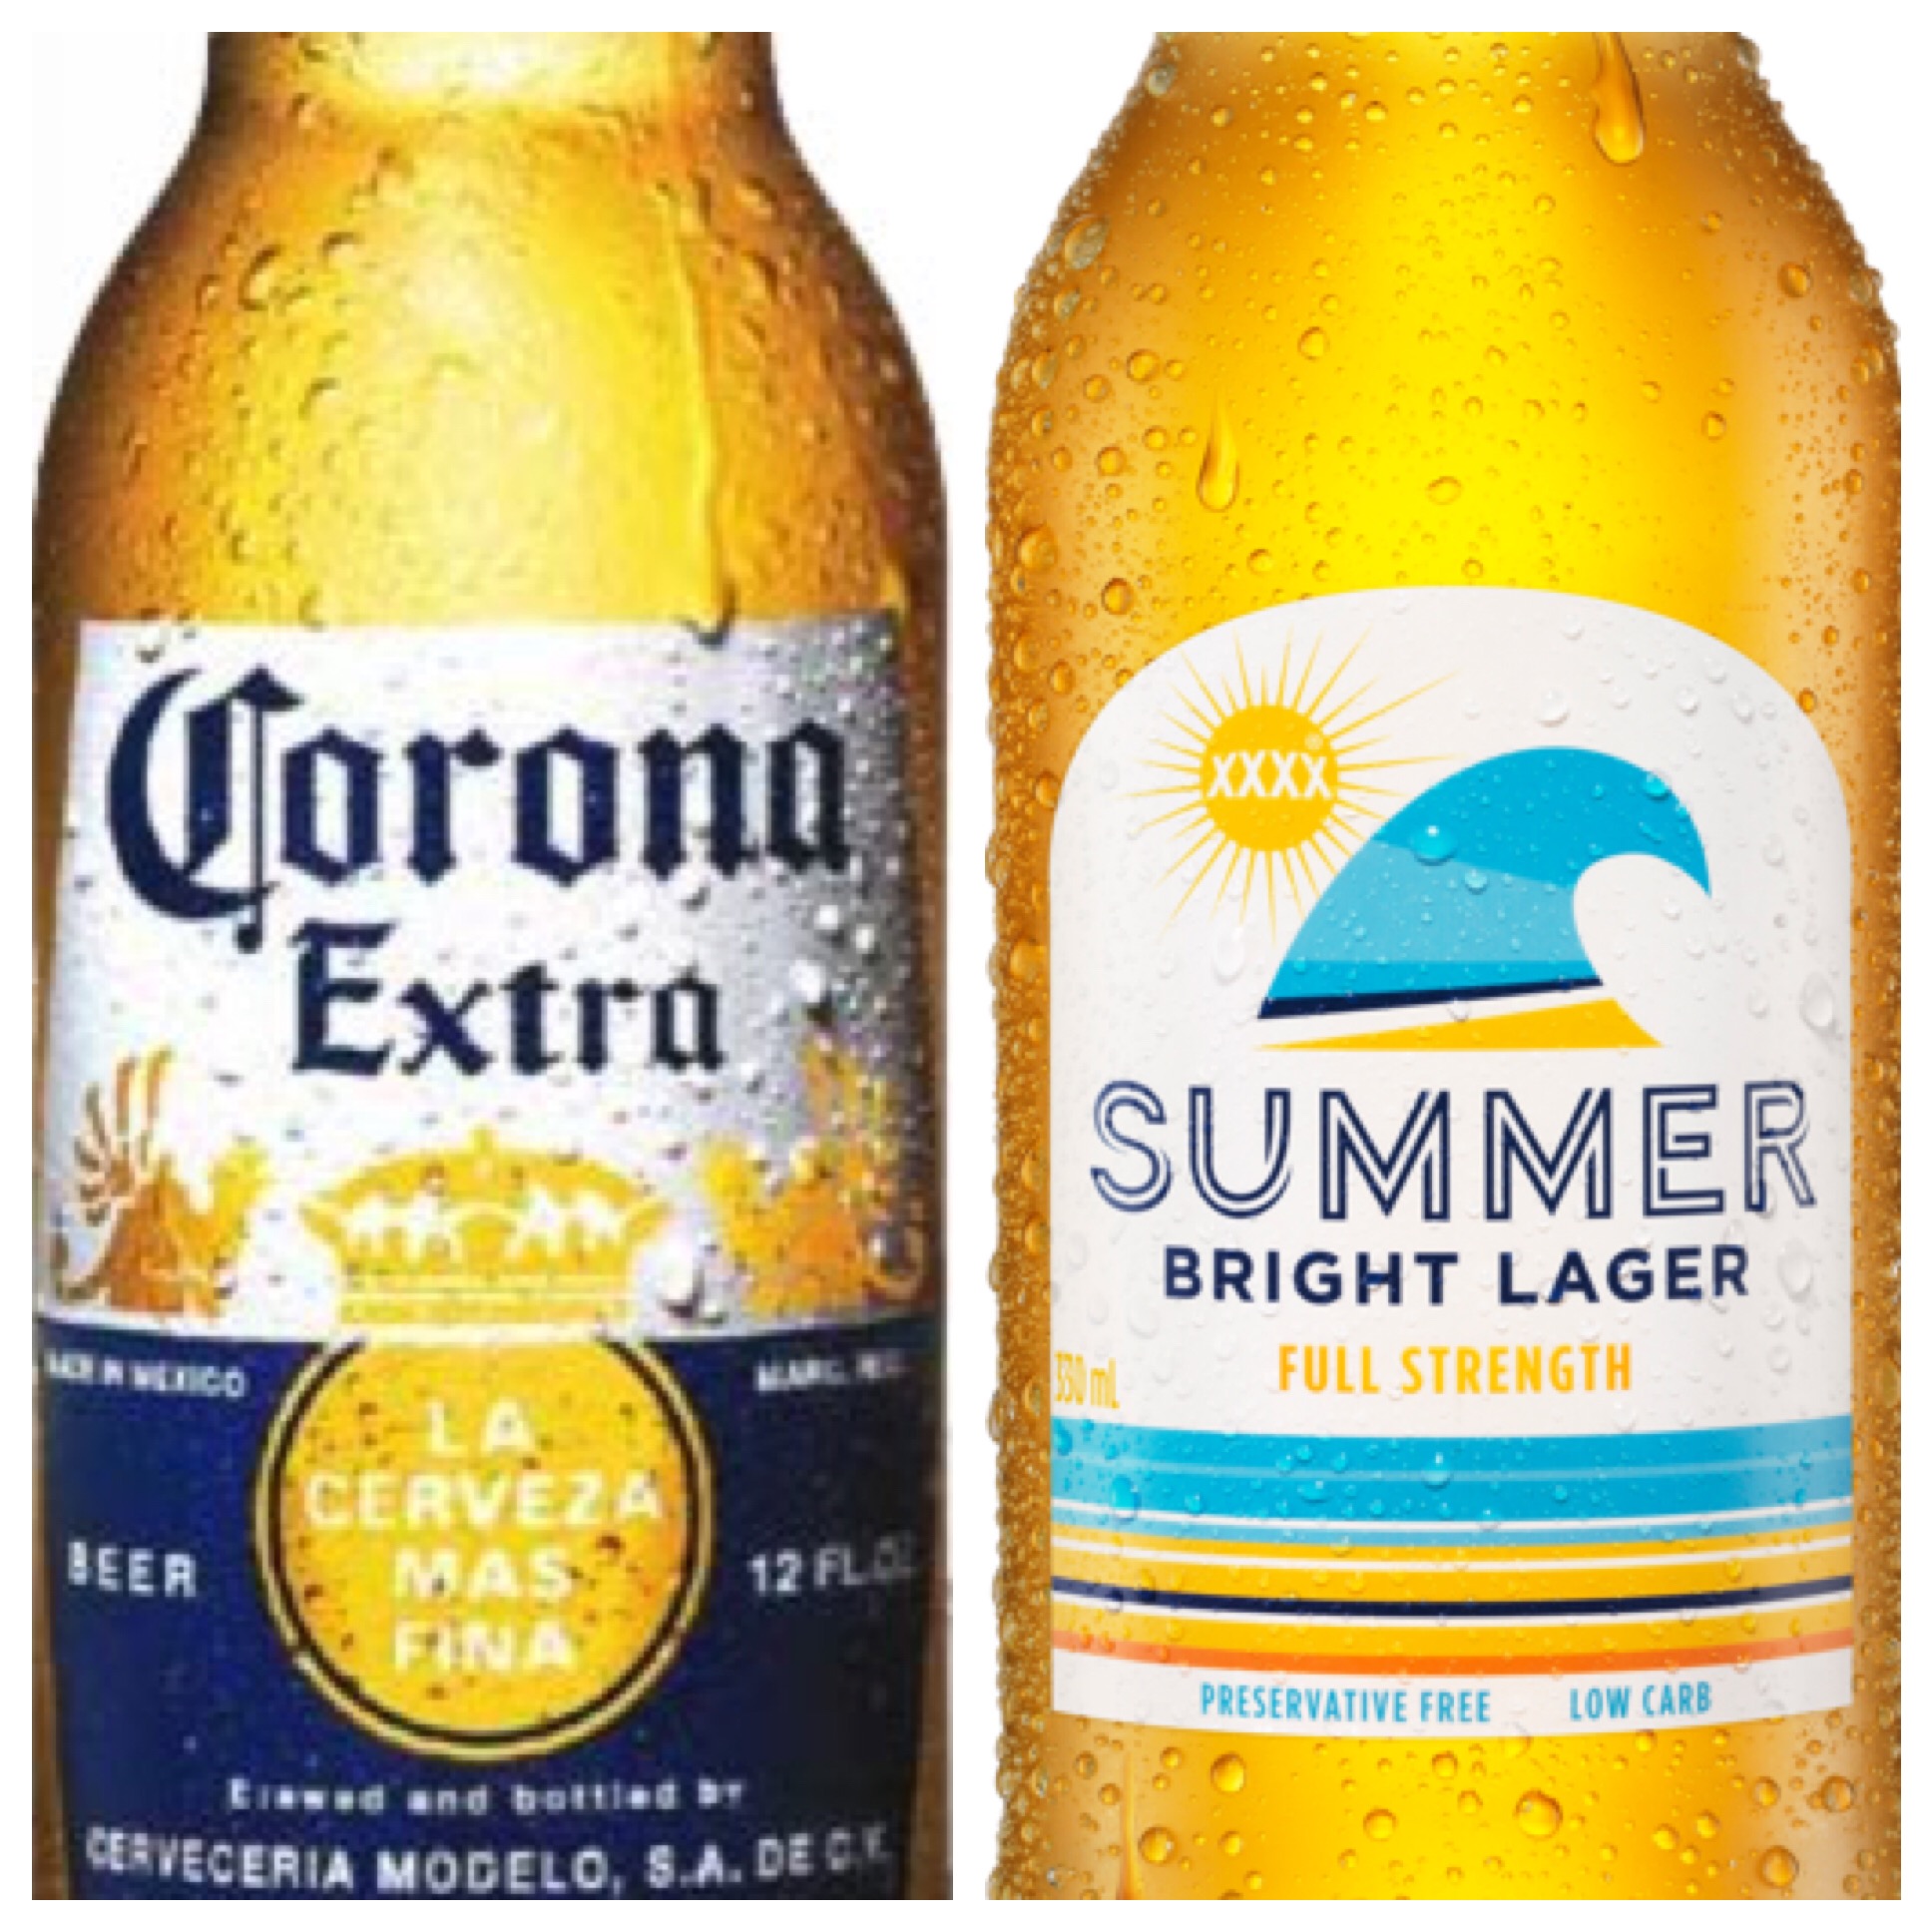 Corona and the new-look XXXX Summer Bright